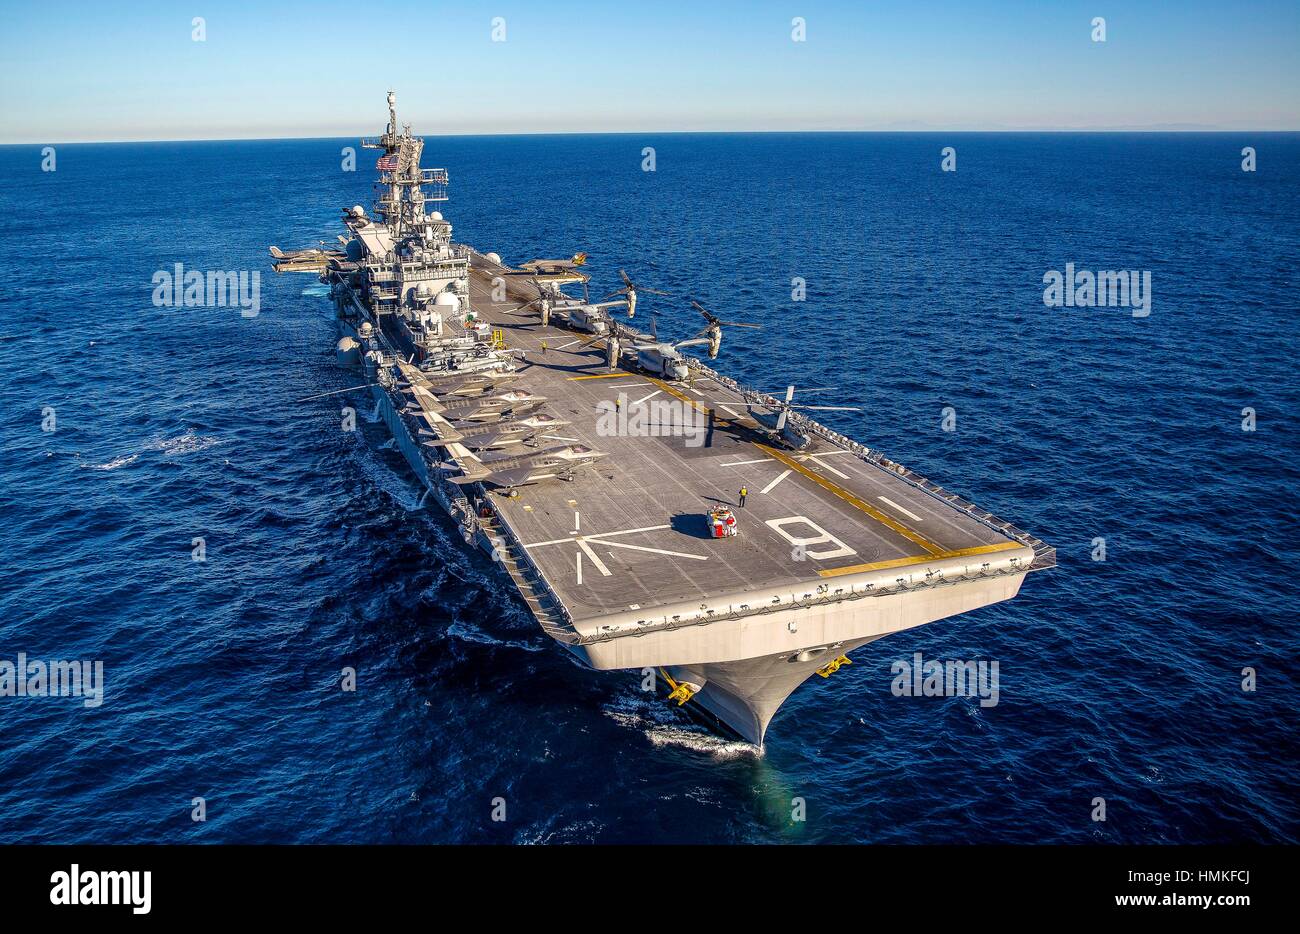 PACIFIC OCEAN -- The USS America, (LHA 6), houses 12 F35-B Lightning II aircraft off the coast of California, November 18, 2016. USS America is a new Stock Photo